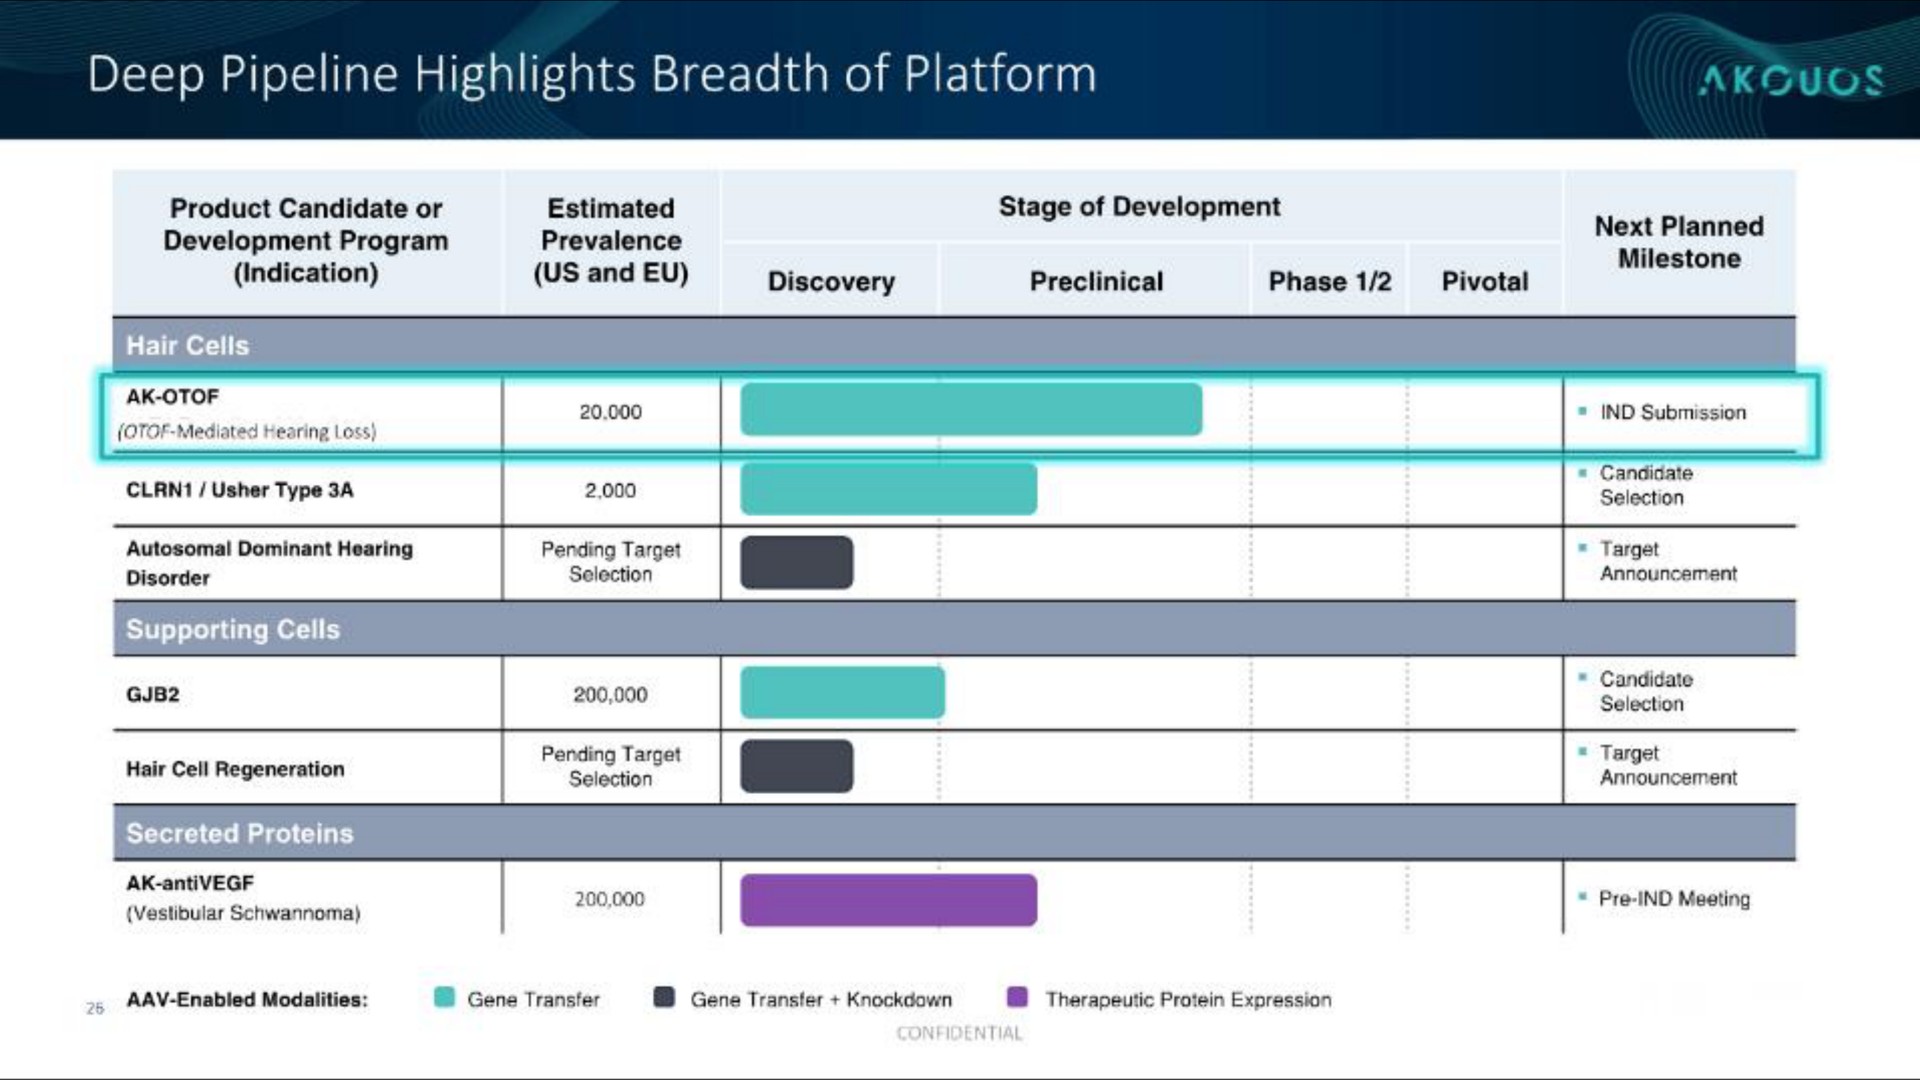 deep pipeline highlights breadth of platform | Akouos